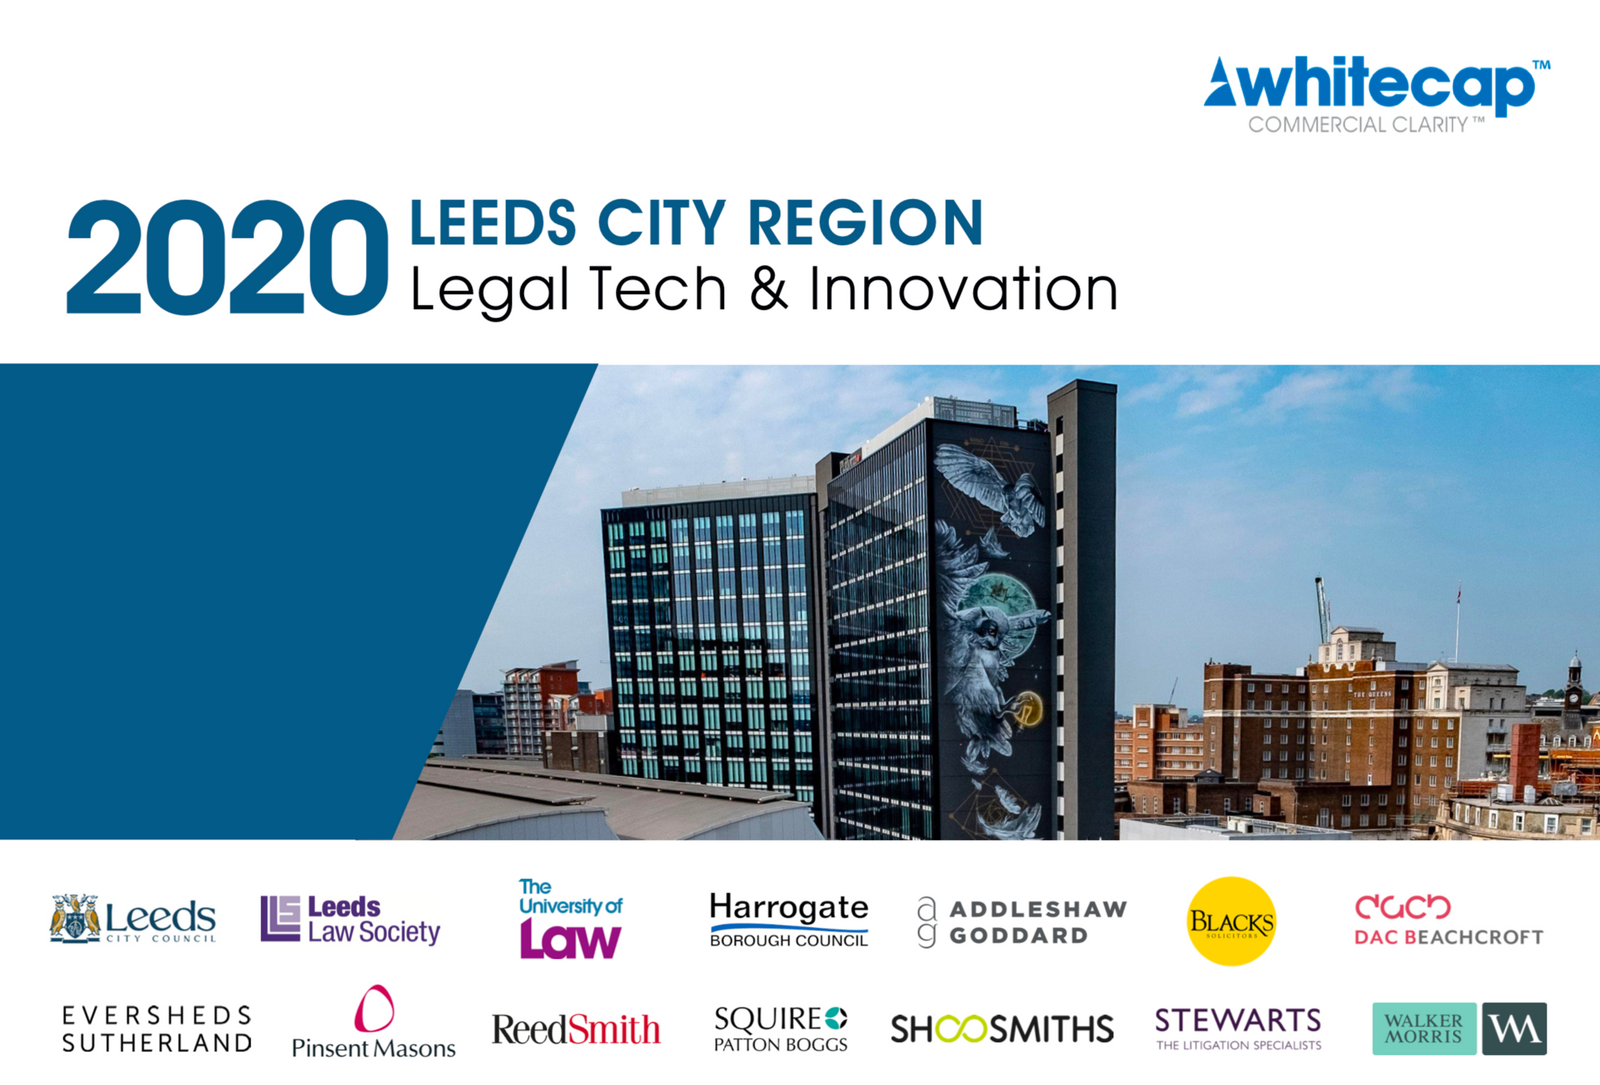 Leeds City Region can become a major hub for Legal Tech & Innovation